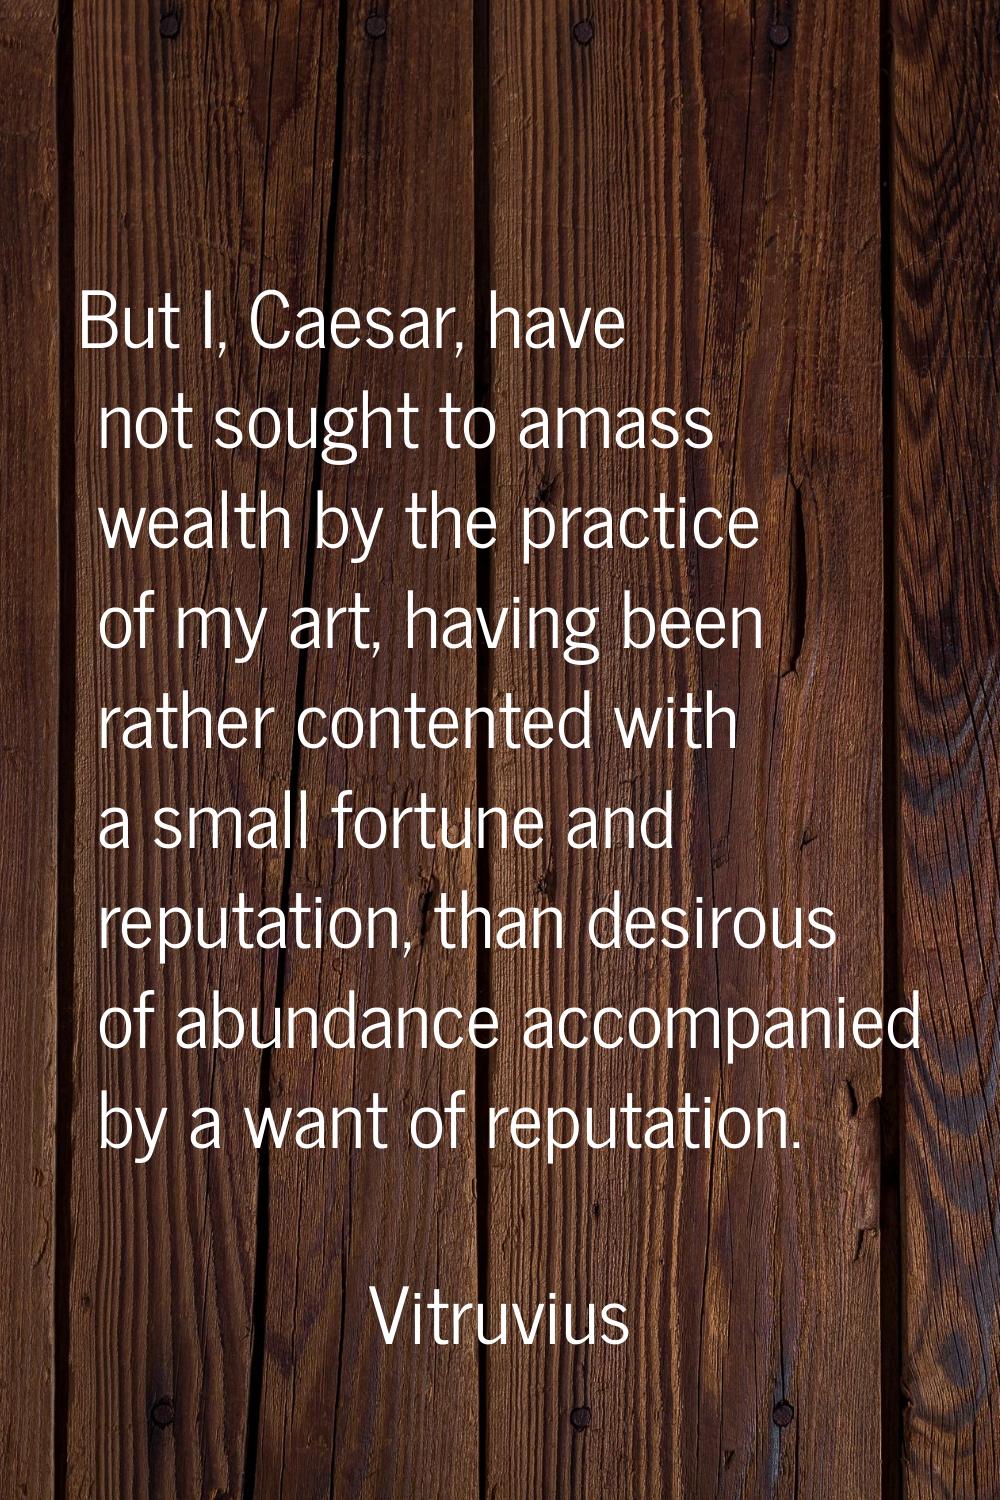 But I, Caesar, have not sought to amass wealth by the practice of my art, having been rather conten